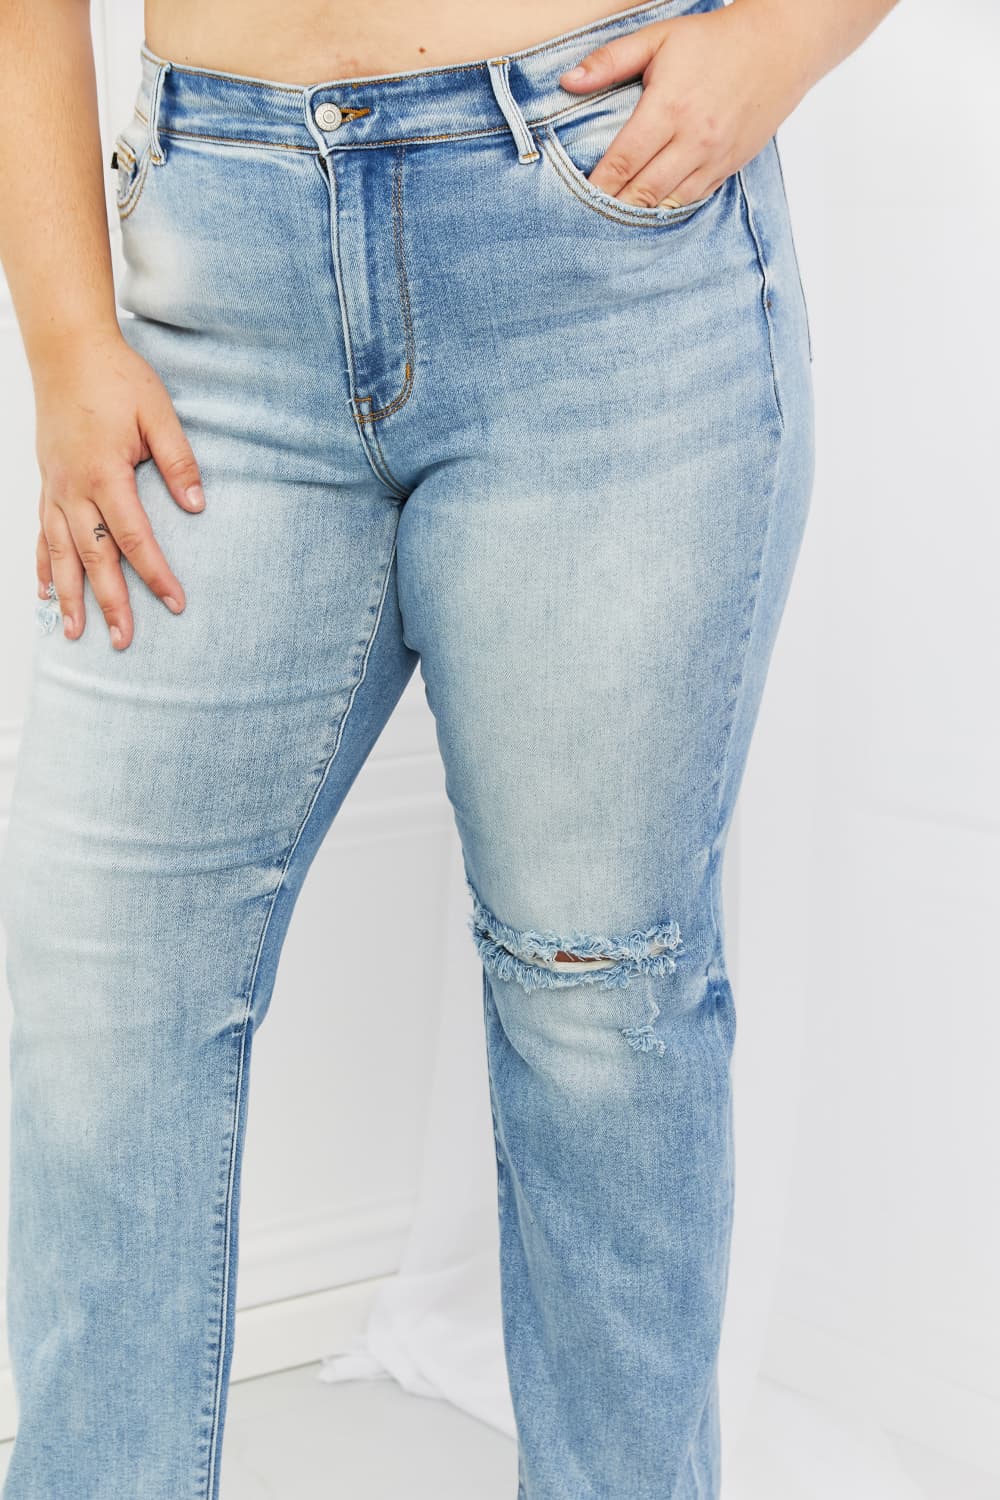 Judy Blue Natalie Full Size Distressed Straight Leg Jeans - nailedmoms